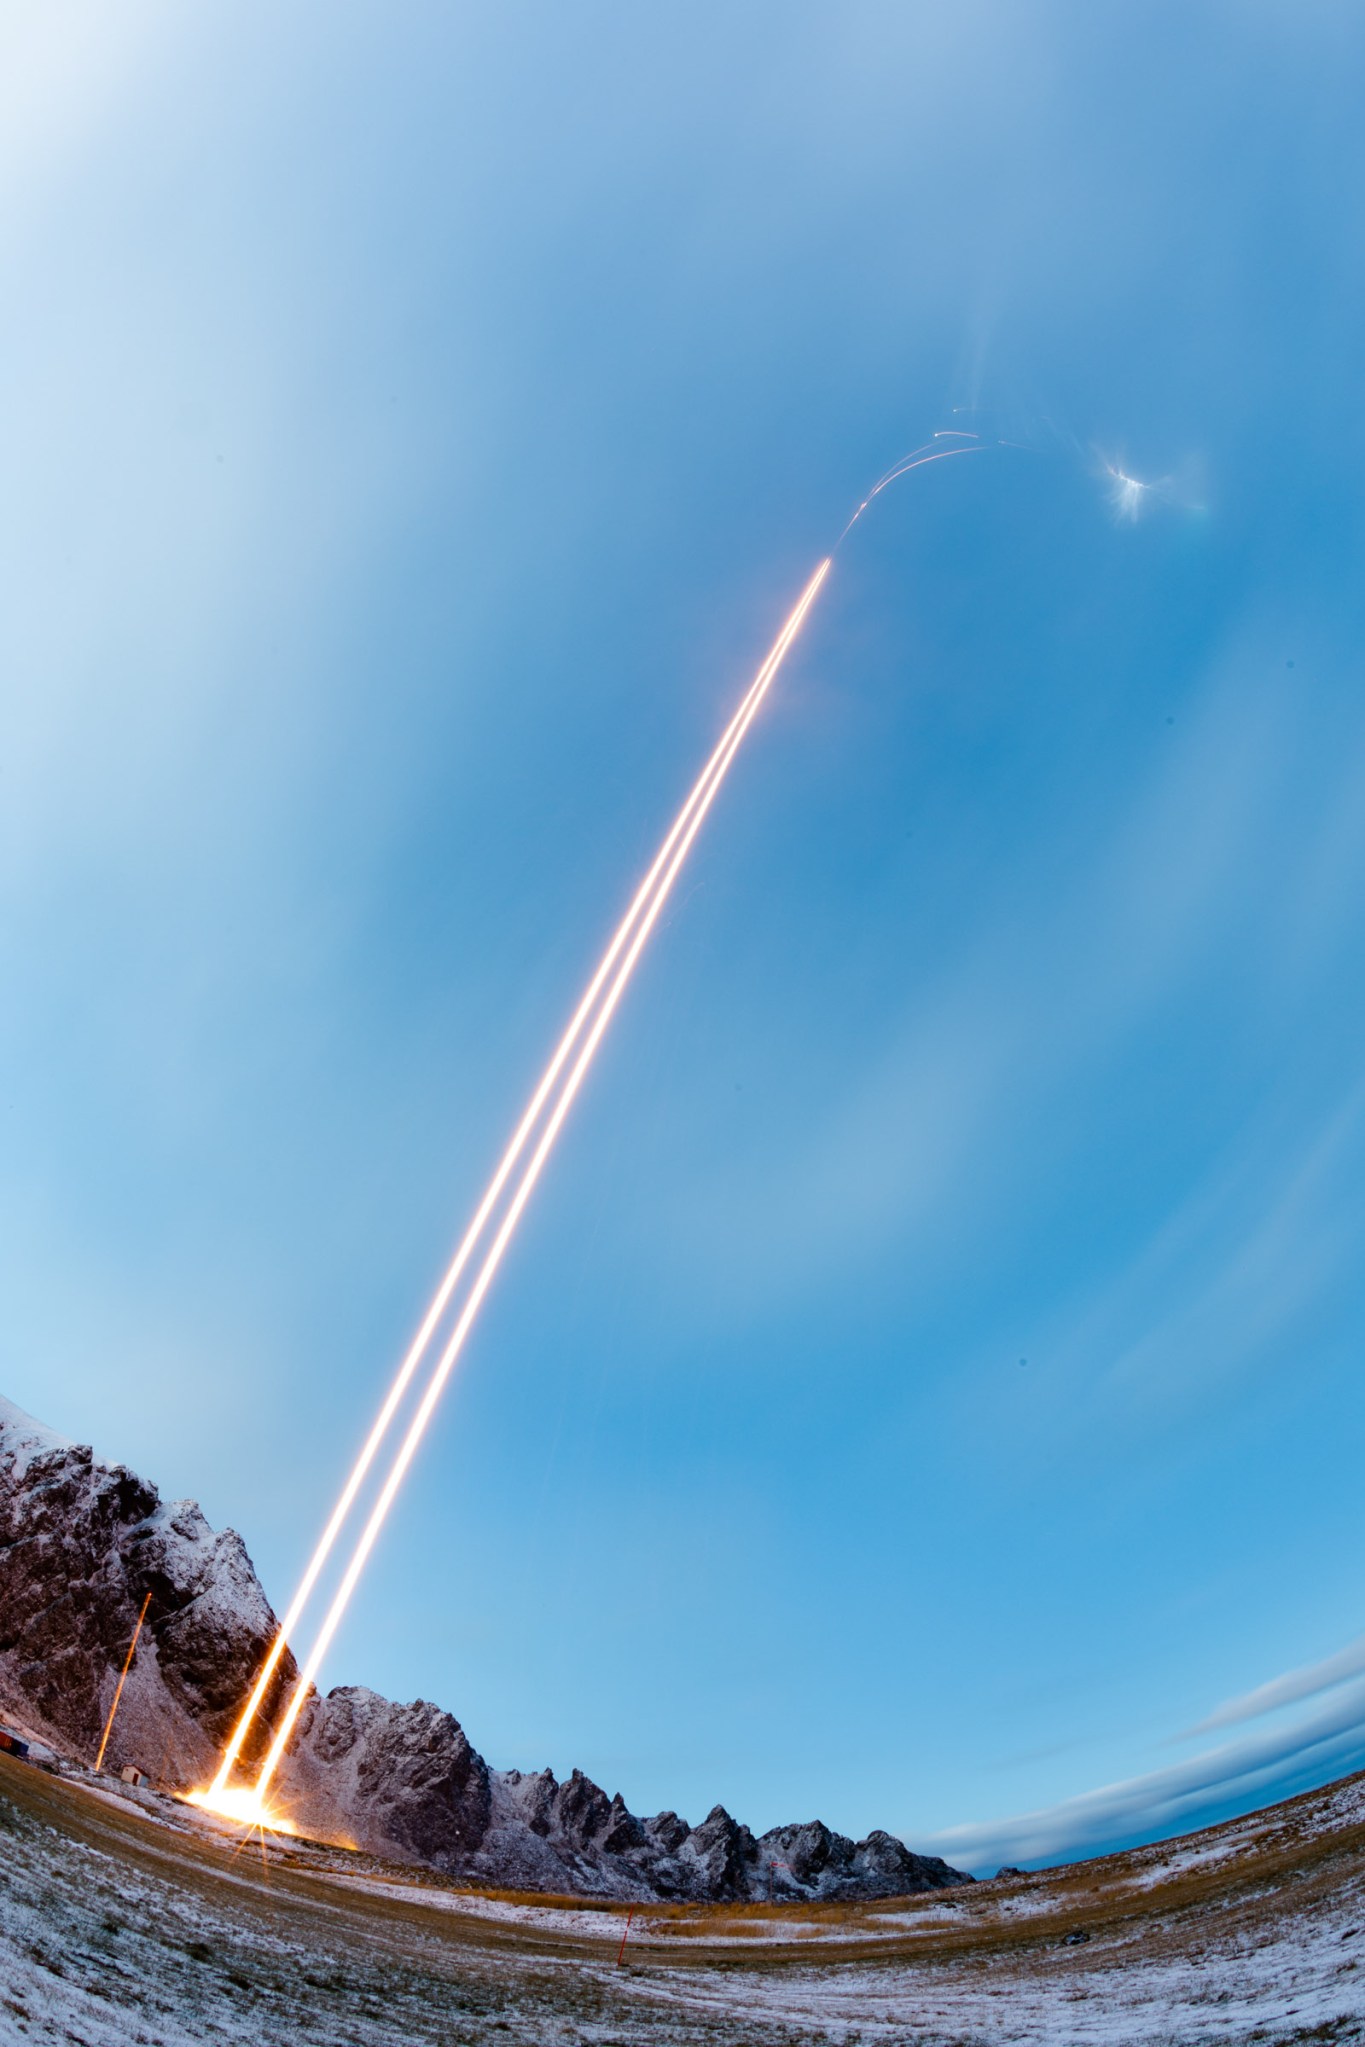 A long-exposure image of two sounding rockets represented by two bright yellow lines launching into a blue sky.